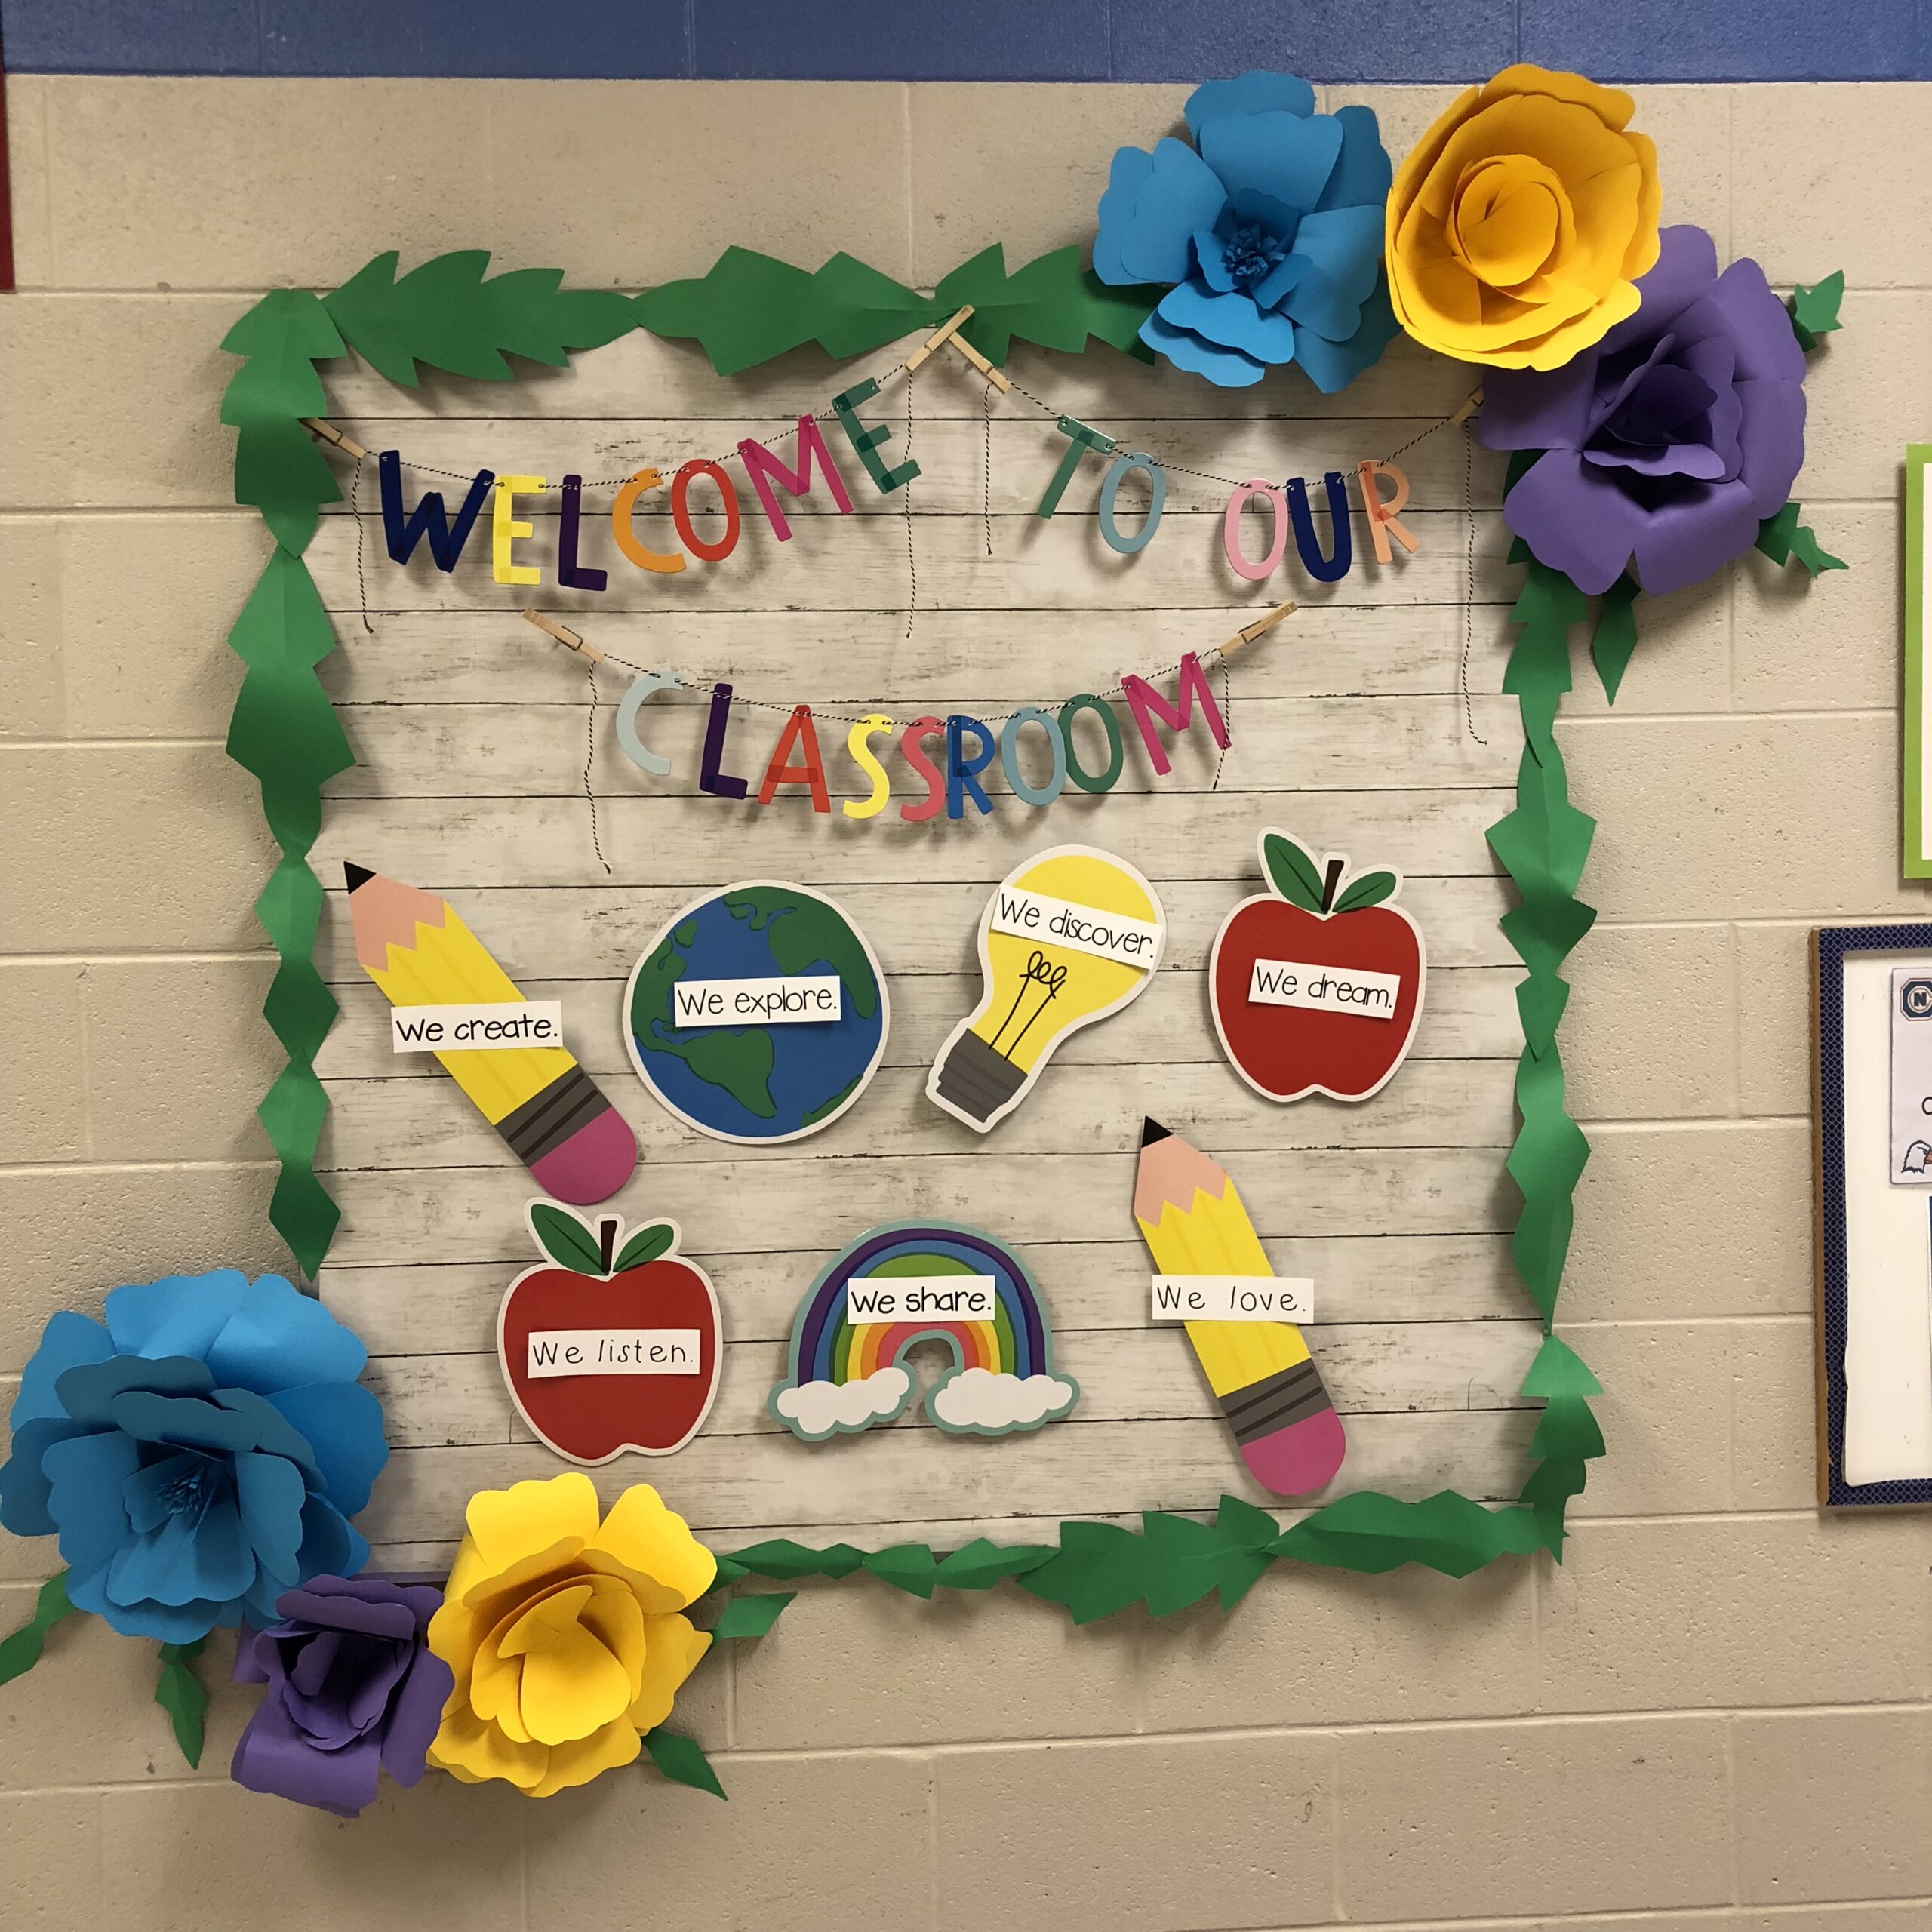 A sign says Welcome to Our Classroom. The corners of the bulletin board have large oversize 3D flowers.